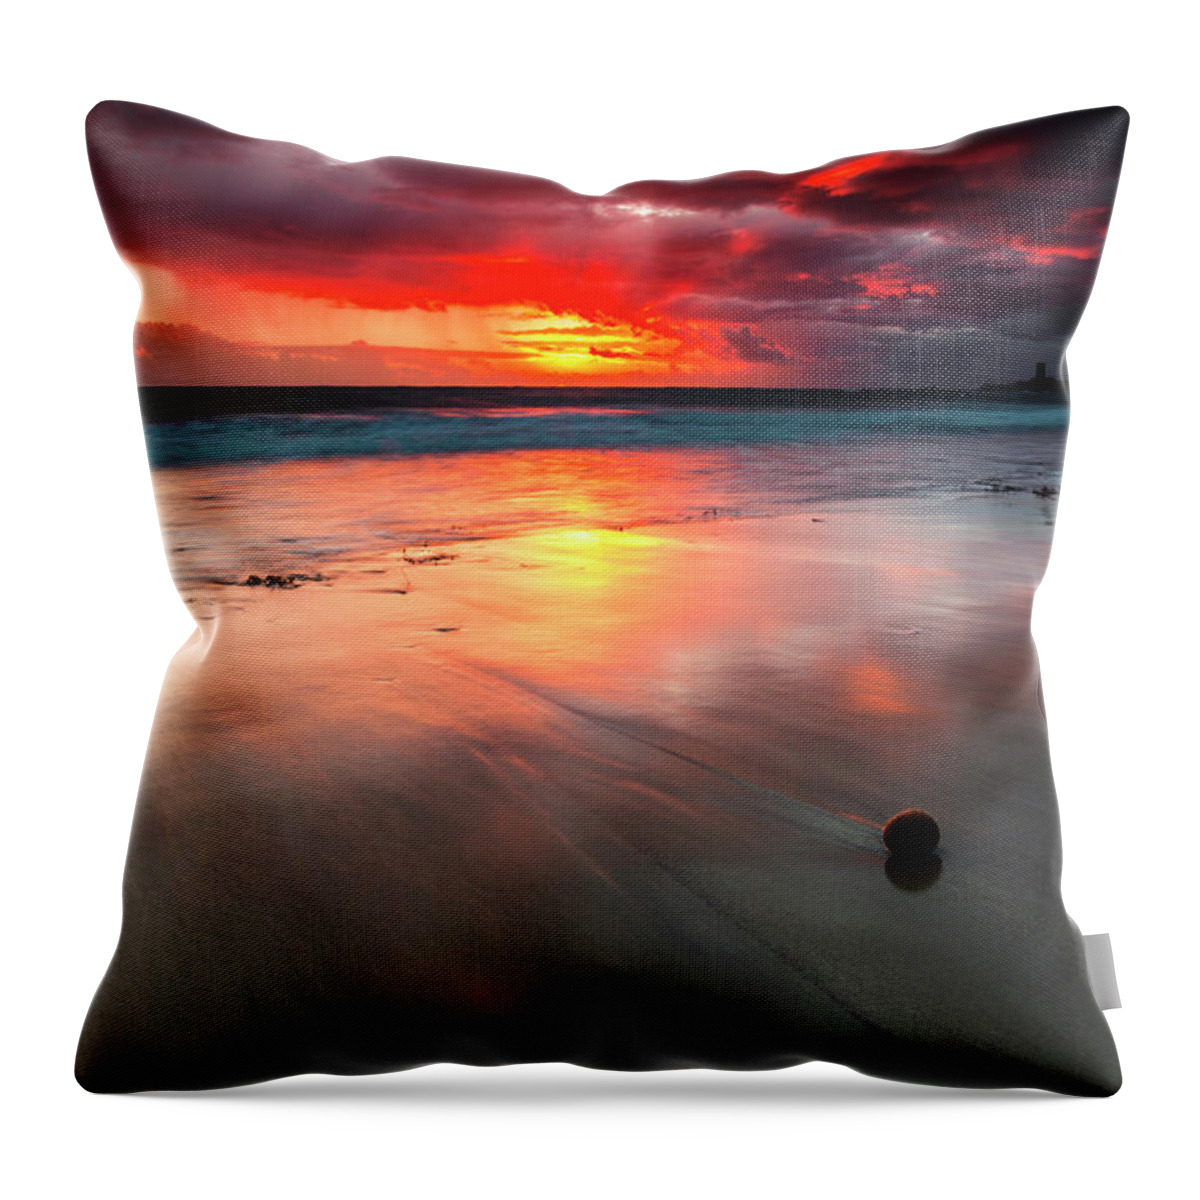 Greece Throw Pillow featuring the photograph Hypnosis by Evgeni Dinev